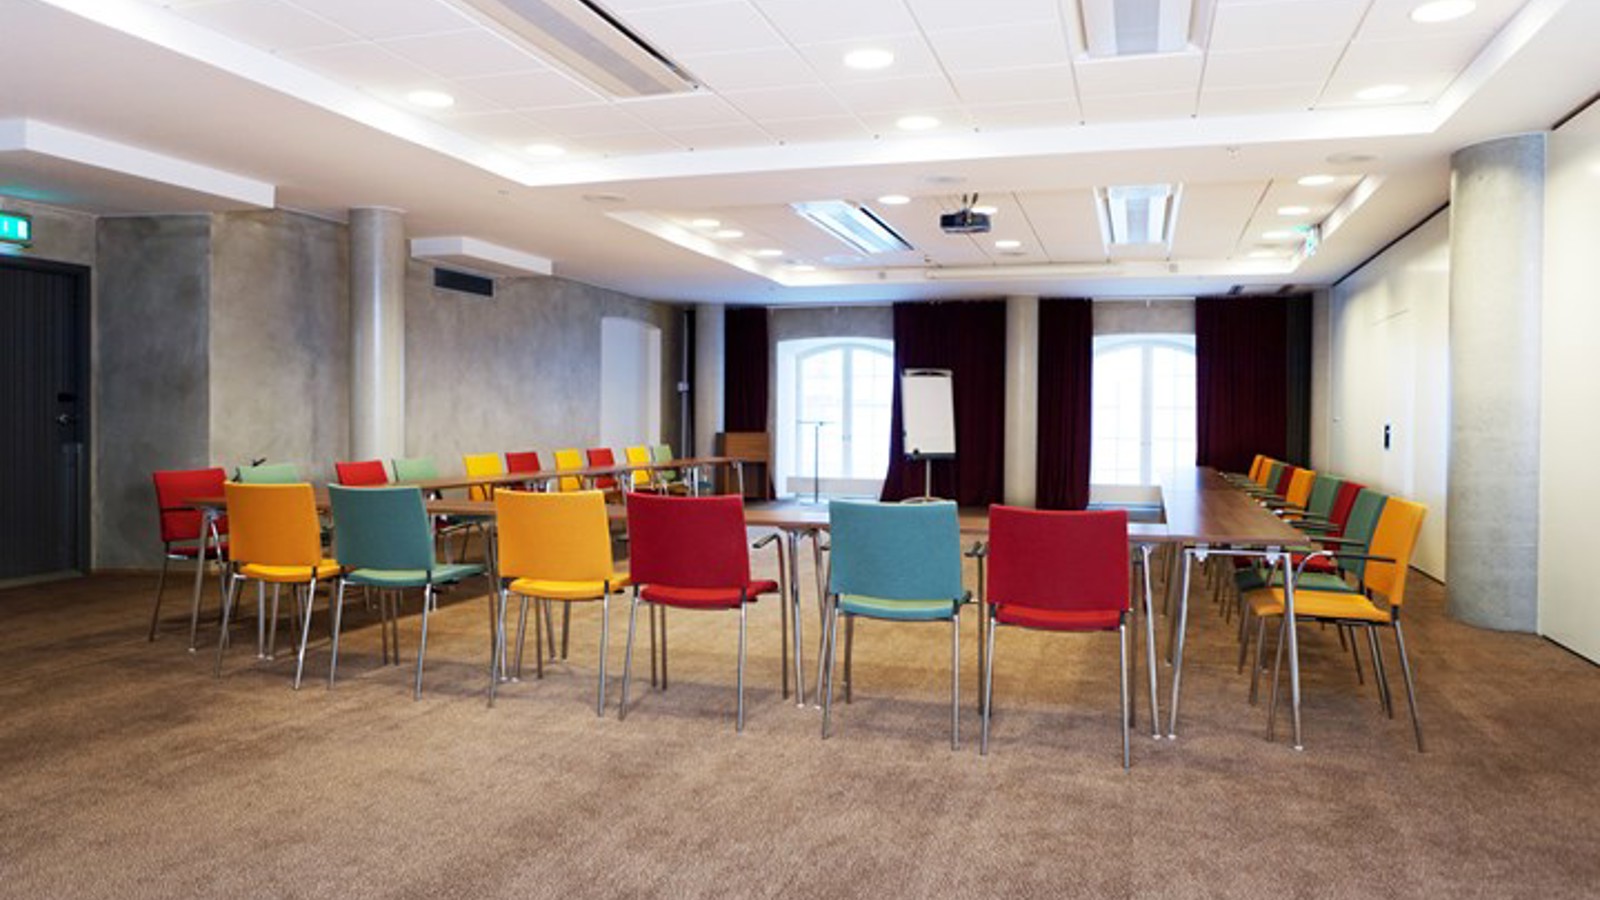 Conference room with u-shaped seating and colorful chairs